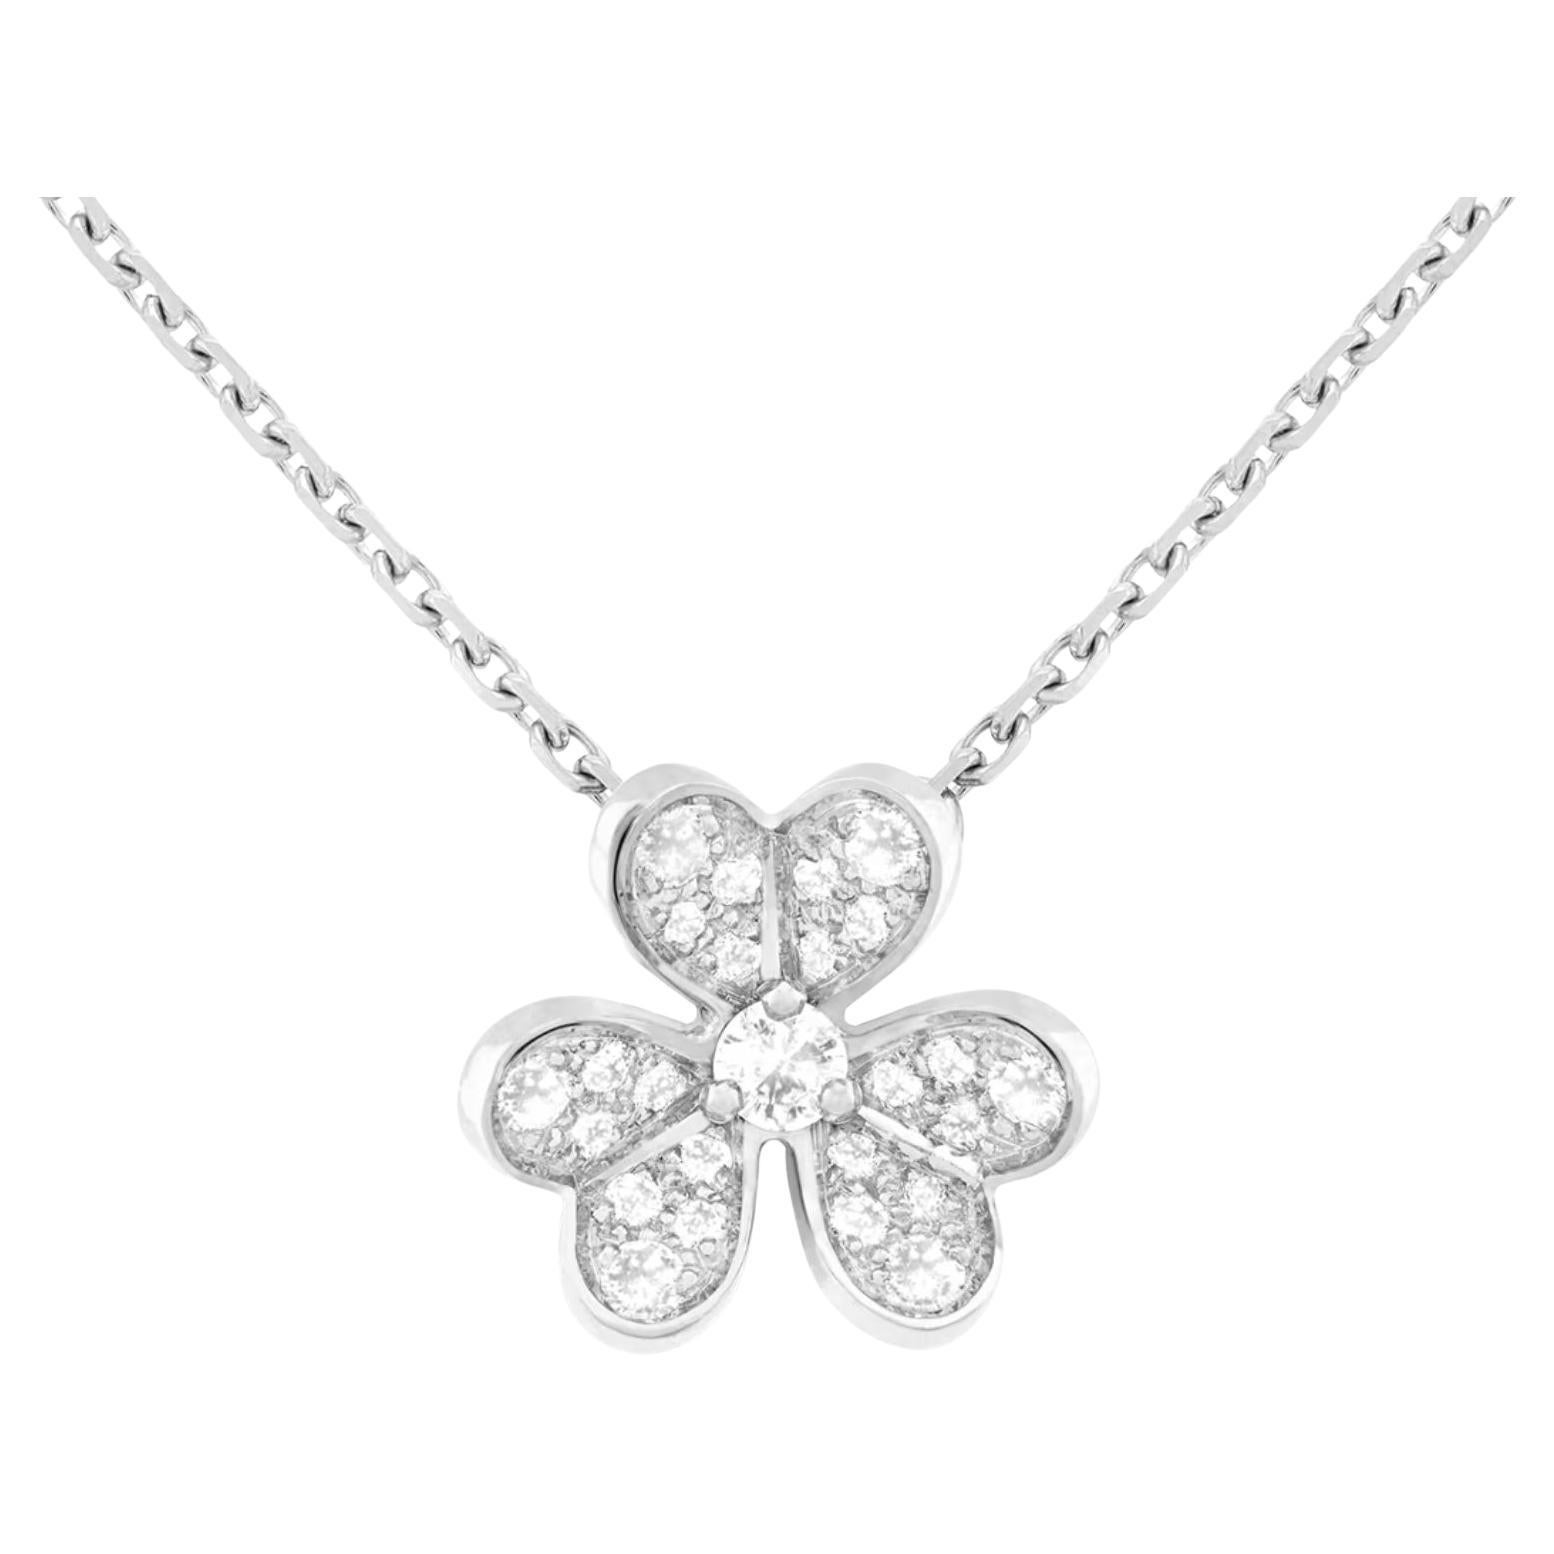 Van Cleef and Arpels Frivole Diamond Pendent Chain Necklace